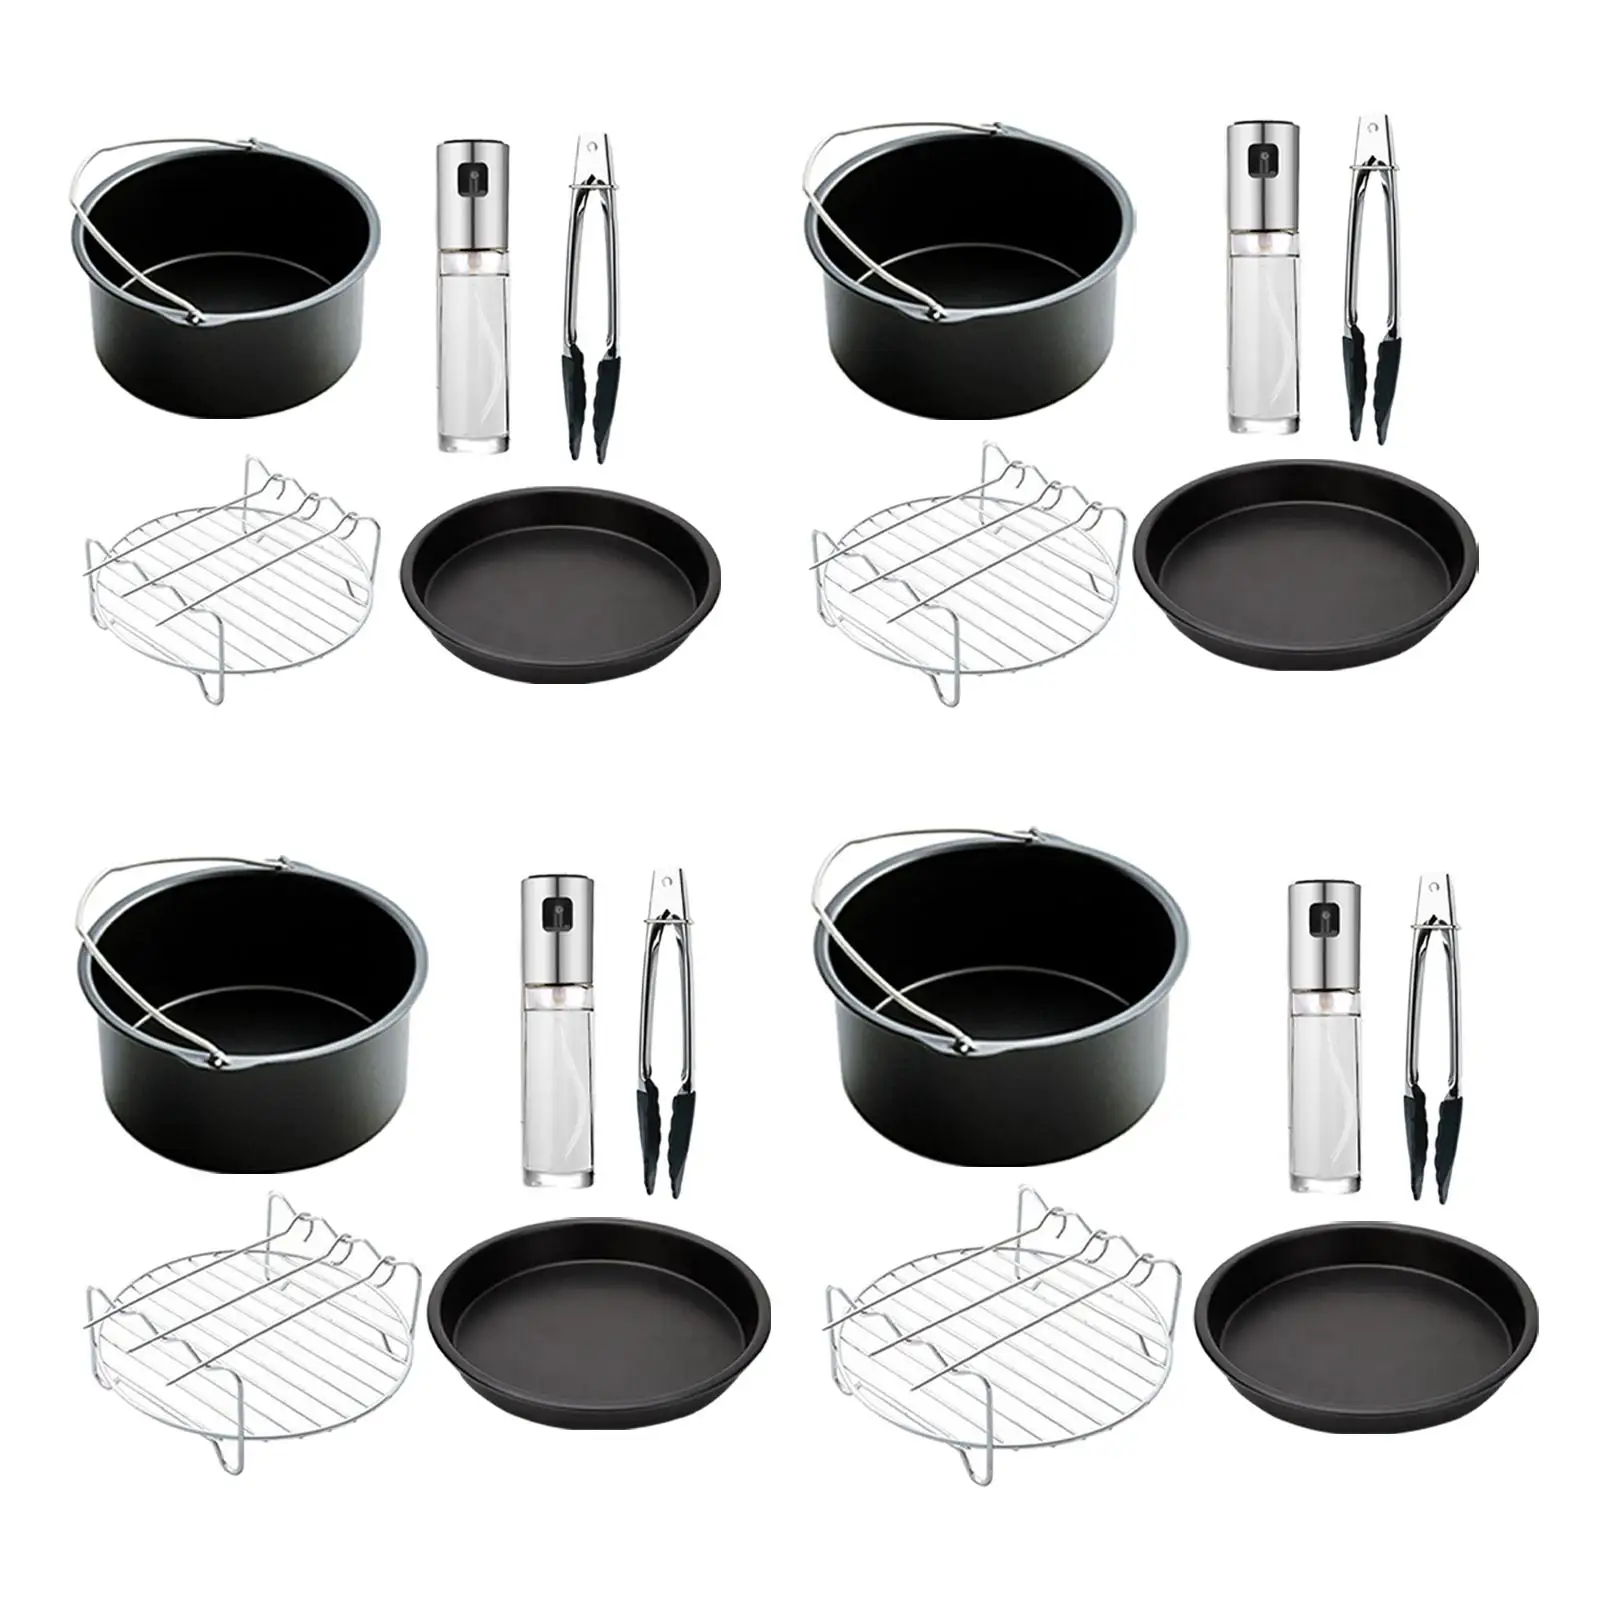 5x Air Fryer Accessories Set 6/7/8/9 Inches Heat Insulation Pad Air Fryer Accessory Kit Cake Basket for Household Cooking BBQ